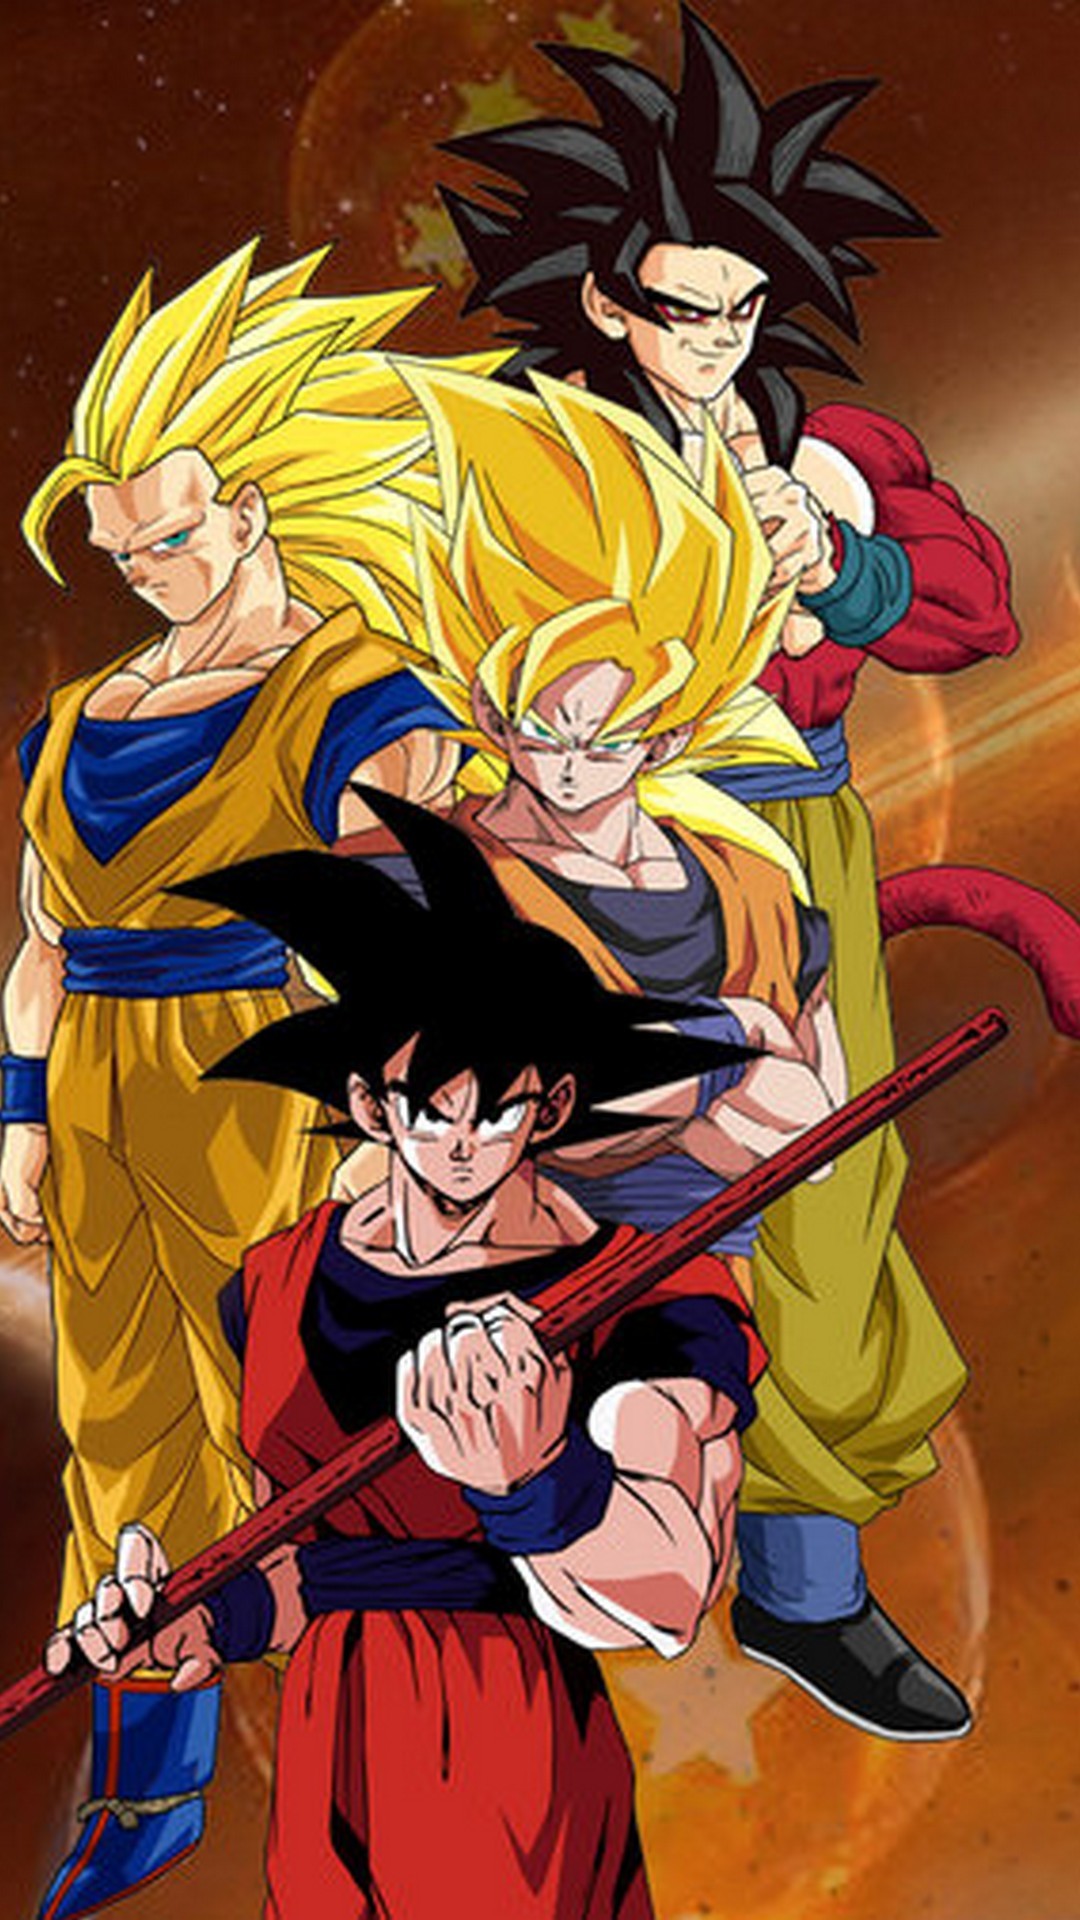 Goku SSJ4 Wallpaper For iPhone with resolution 1080X1920 pixel. You can make this wallpaper for your iPhone 5, 6, 7, 8, X backgrounds, Mobile Screensaver, or iPad Lock Screen